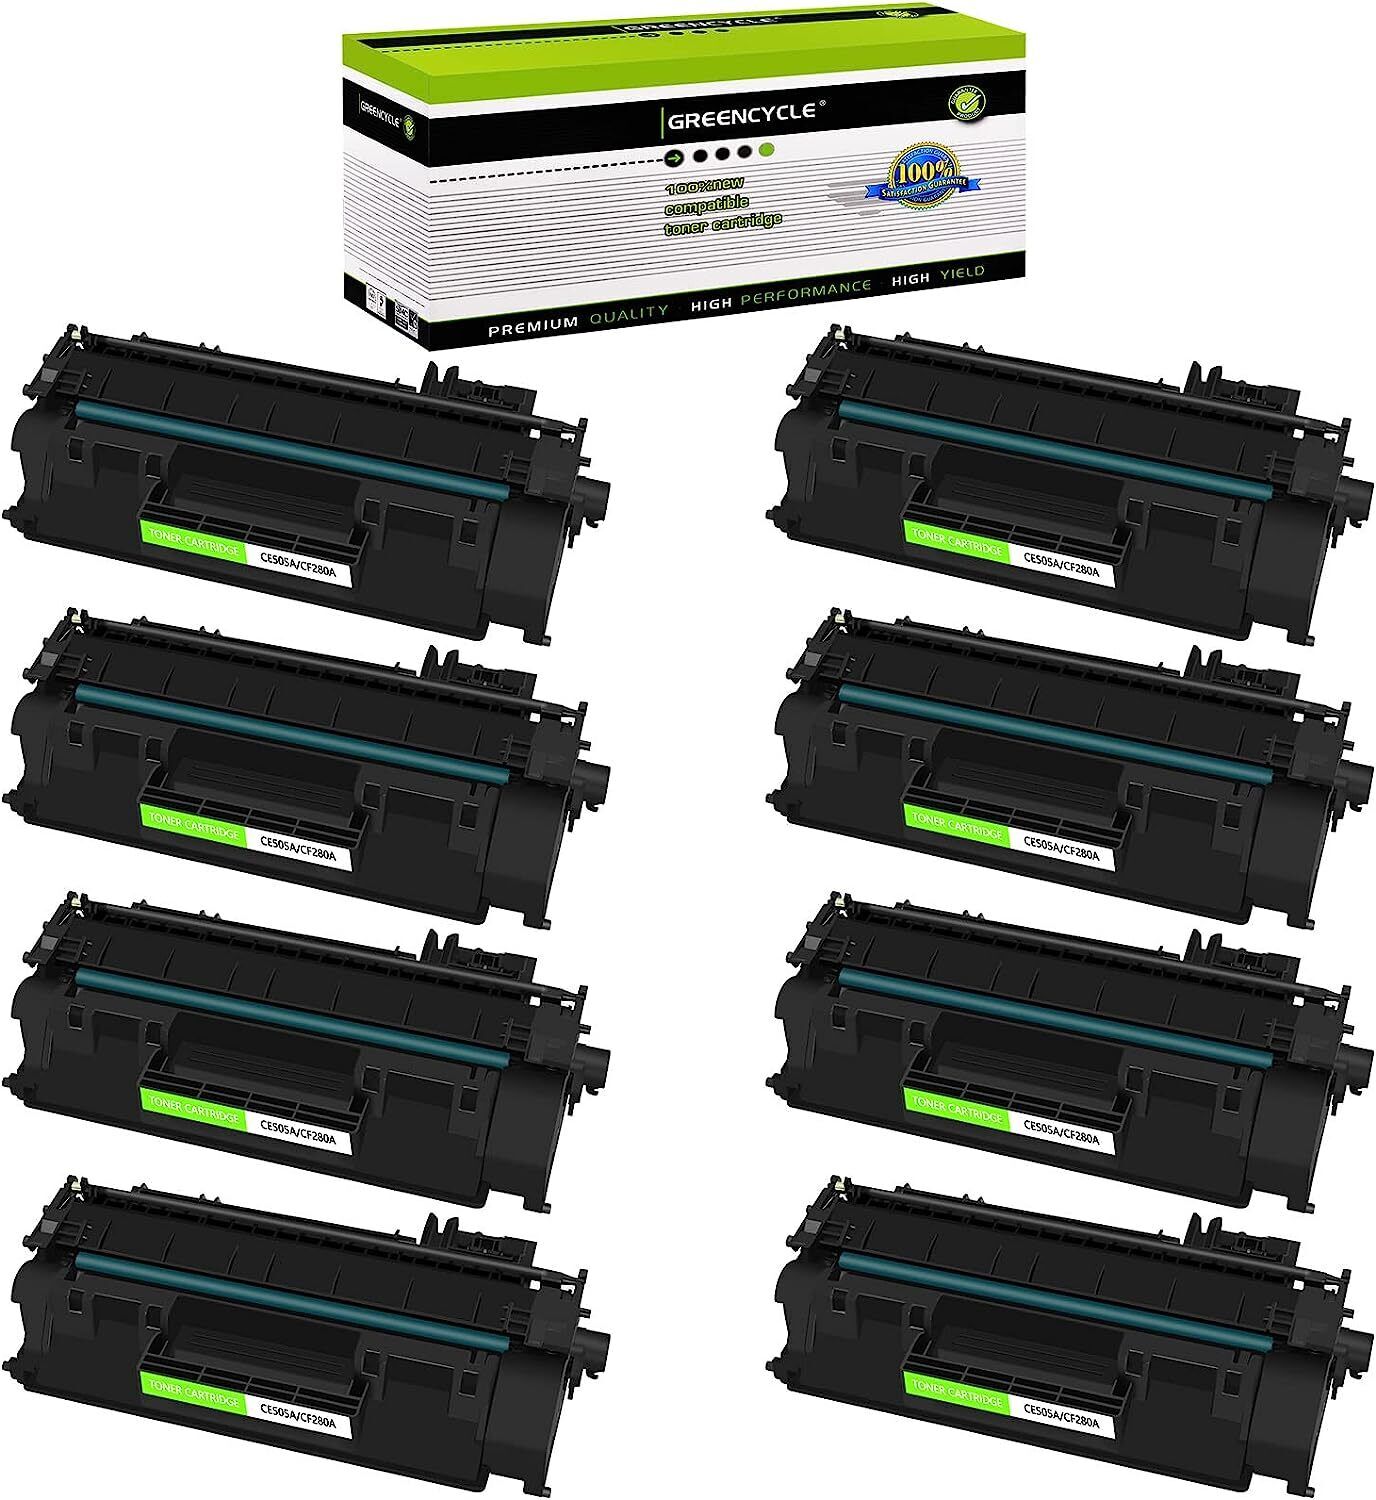 8PK greencycle Compatible Toner Cartridge for HP 05A CE505A LaserJet P2035 P2050